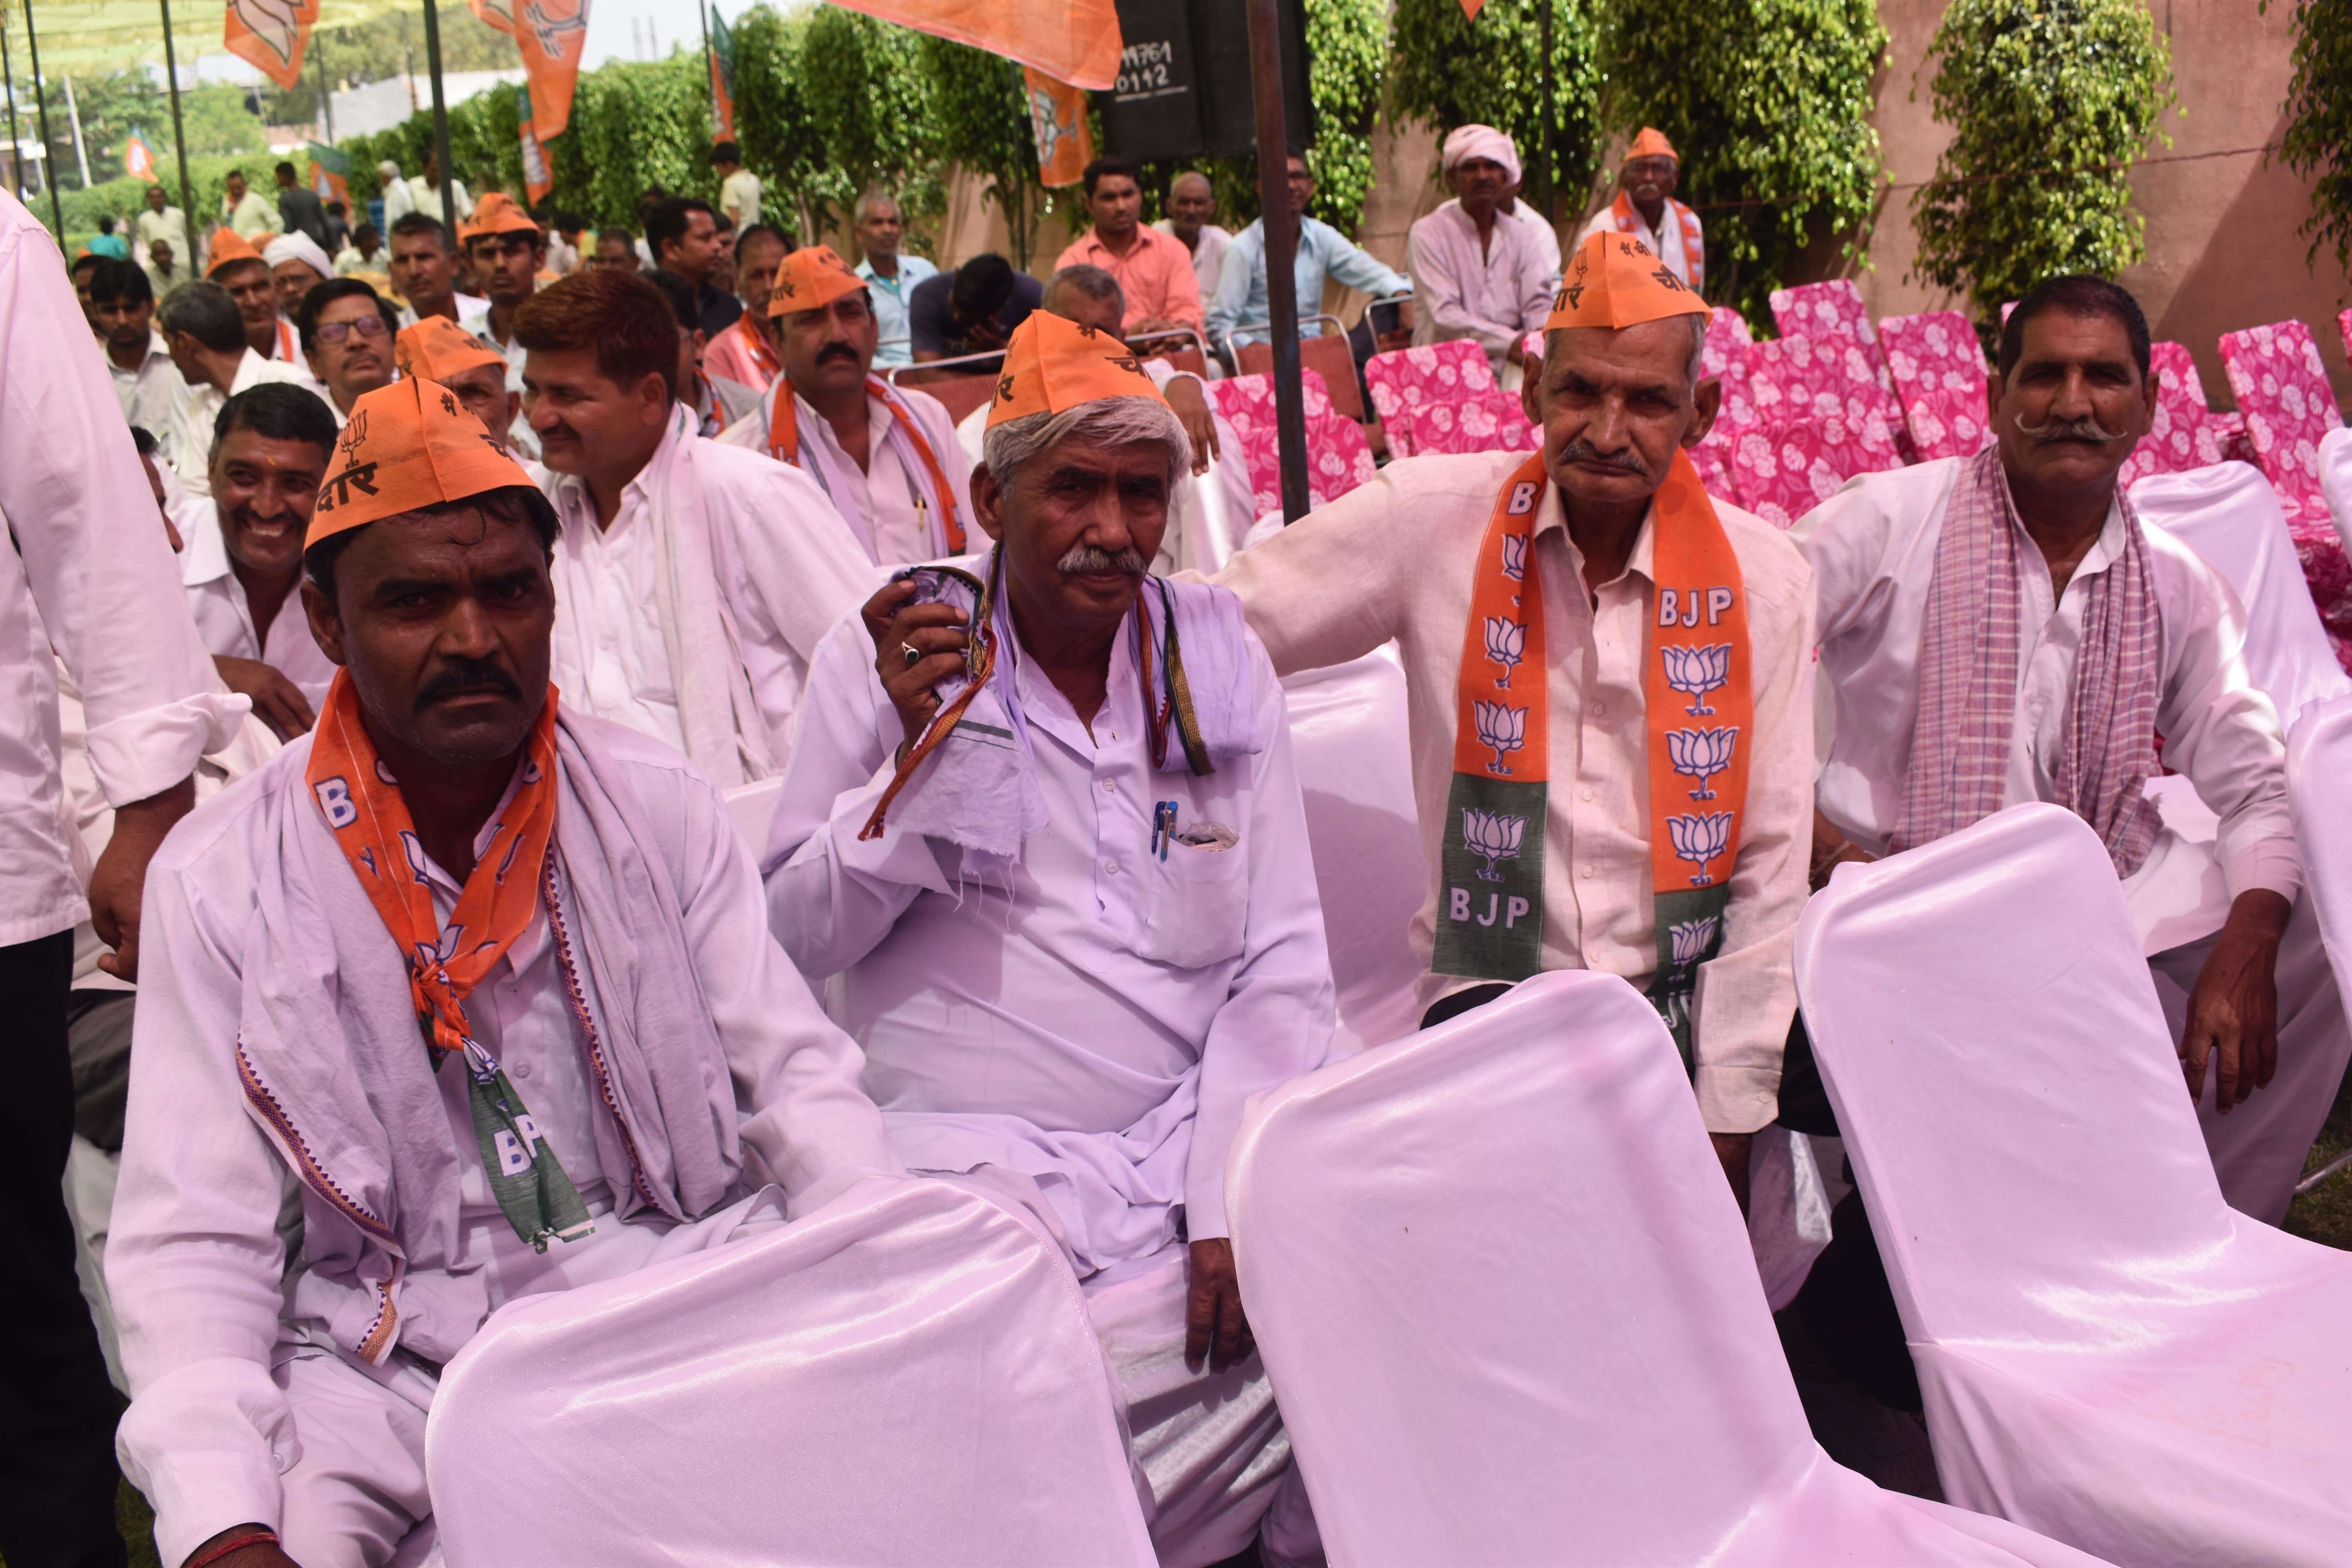 BJP supporters shared their problems in a public meeting at Faleda Bangar, a village in Jewar